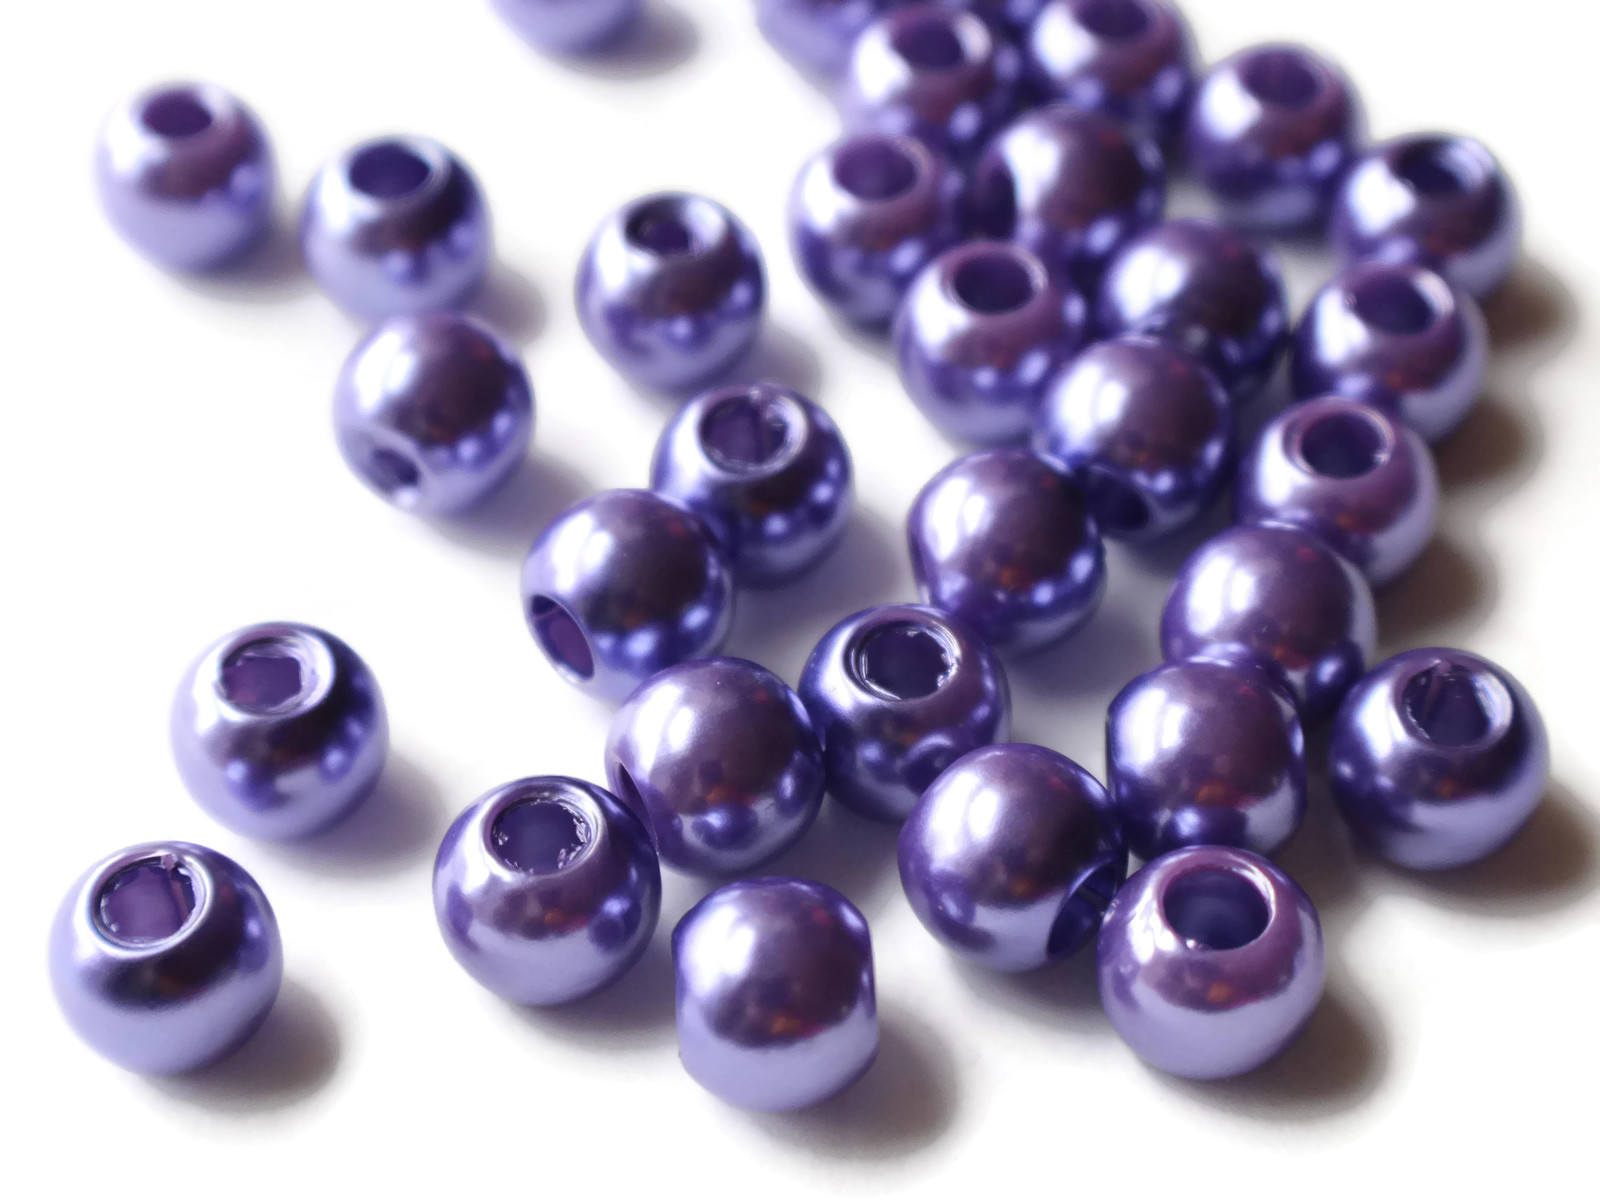 Acrylic Abs Pearl Bead with Hole For Kids Chunky Necklace Halloween Purple  Beads for Jewelry Making Loose Pearls A67 6mm to 30mm - AliExpress